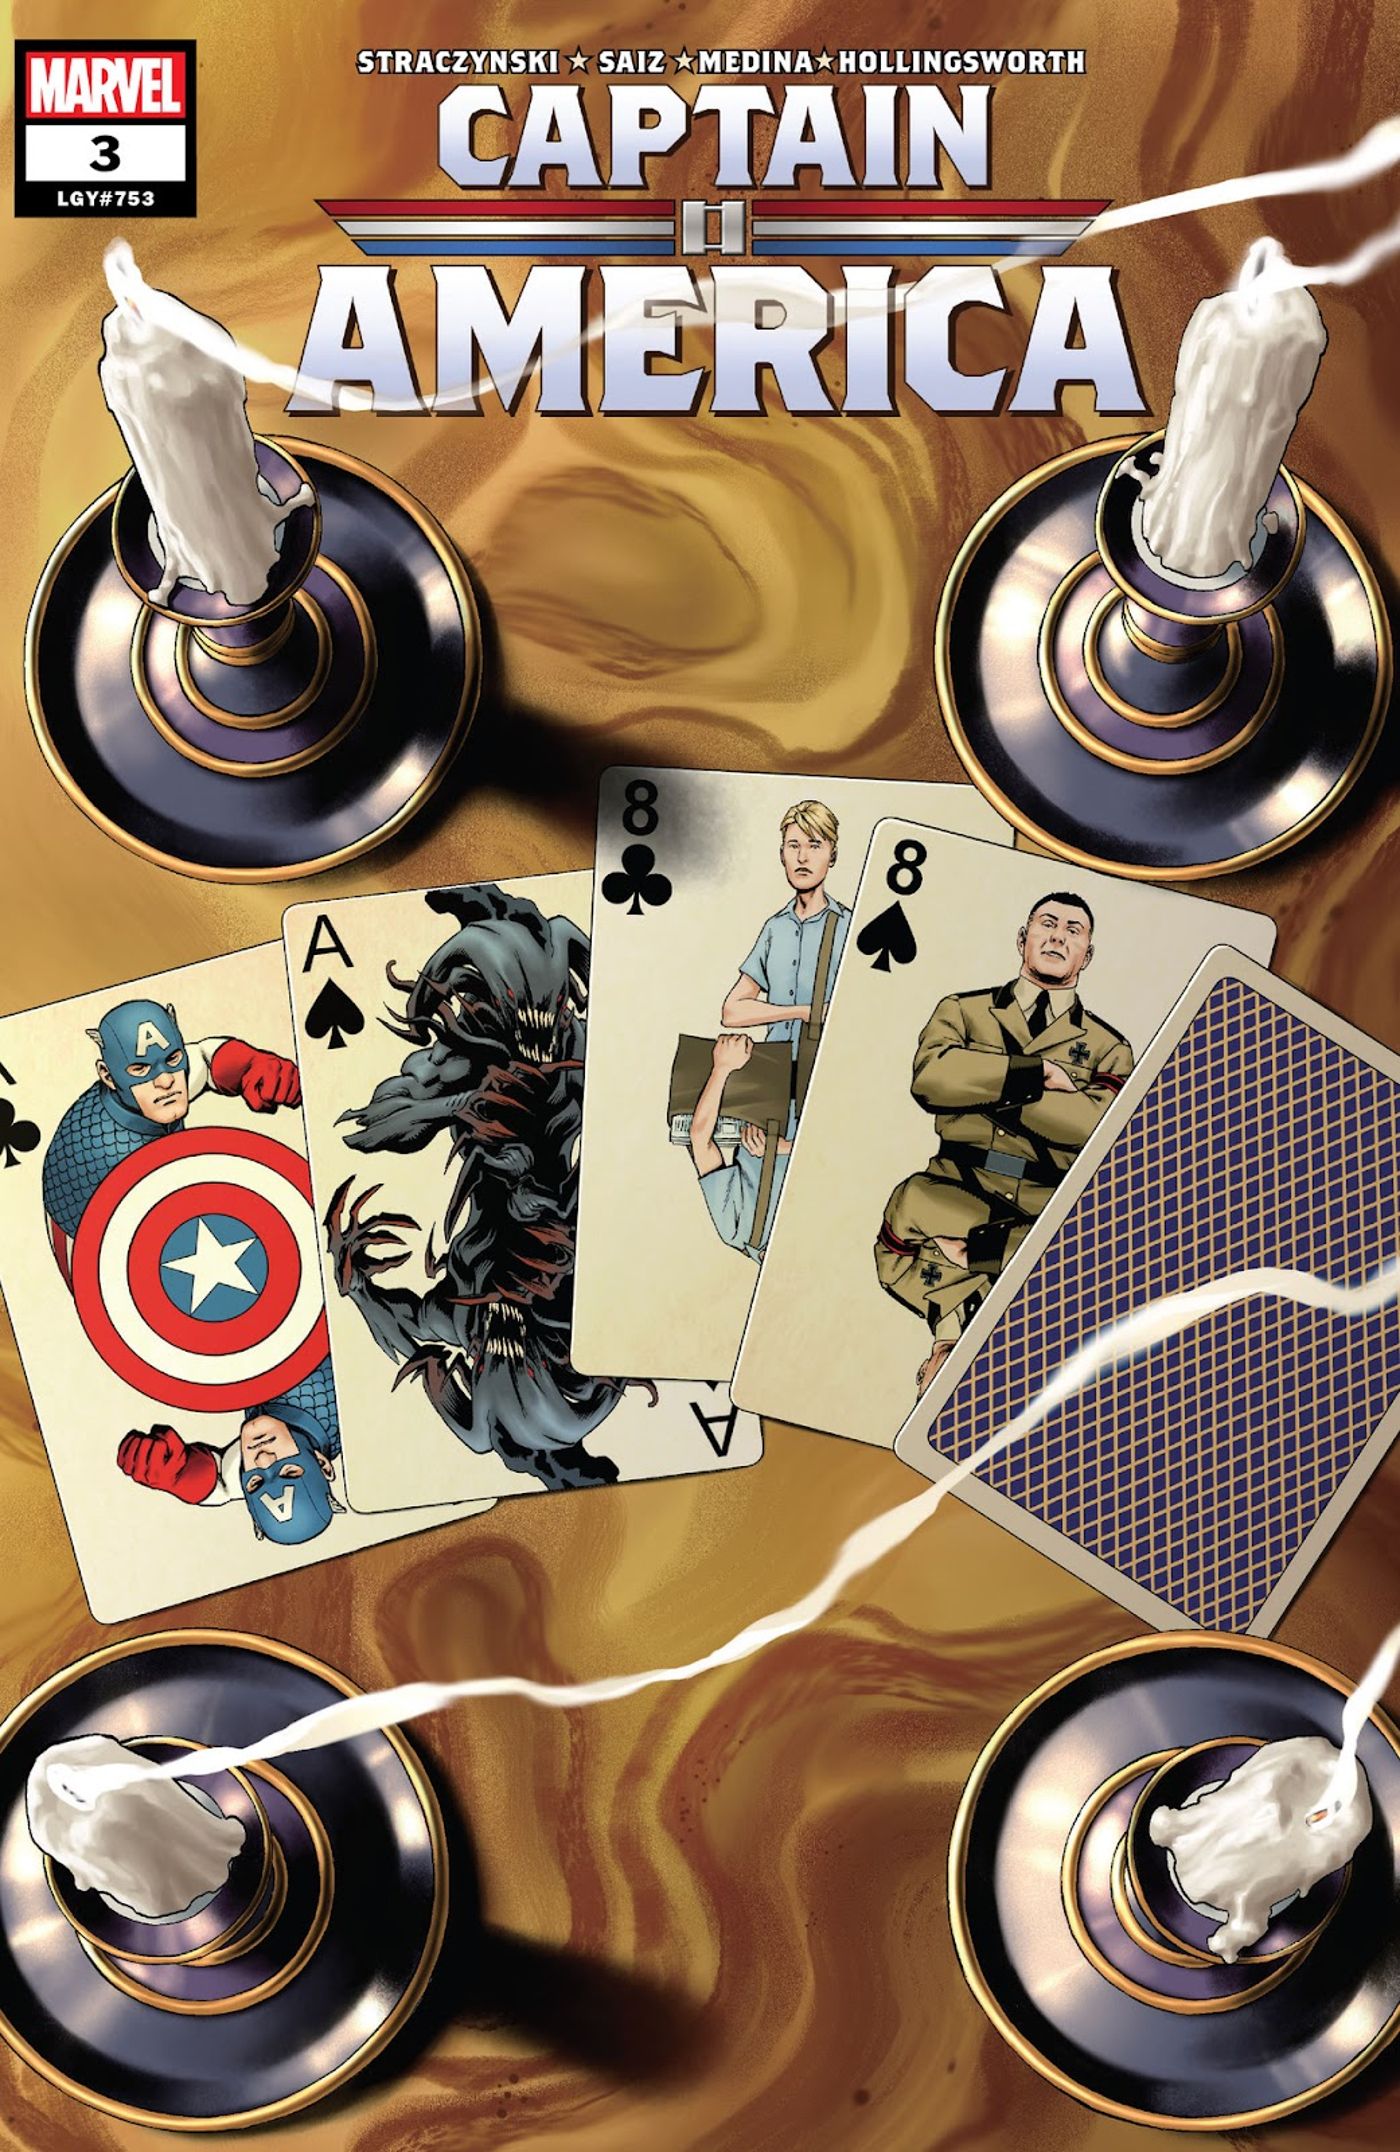 Main cover for Captain America #3 showing playing cards of Captain America, young Steve Rogers, and others. 